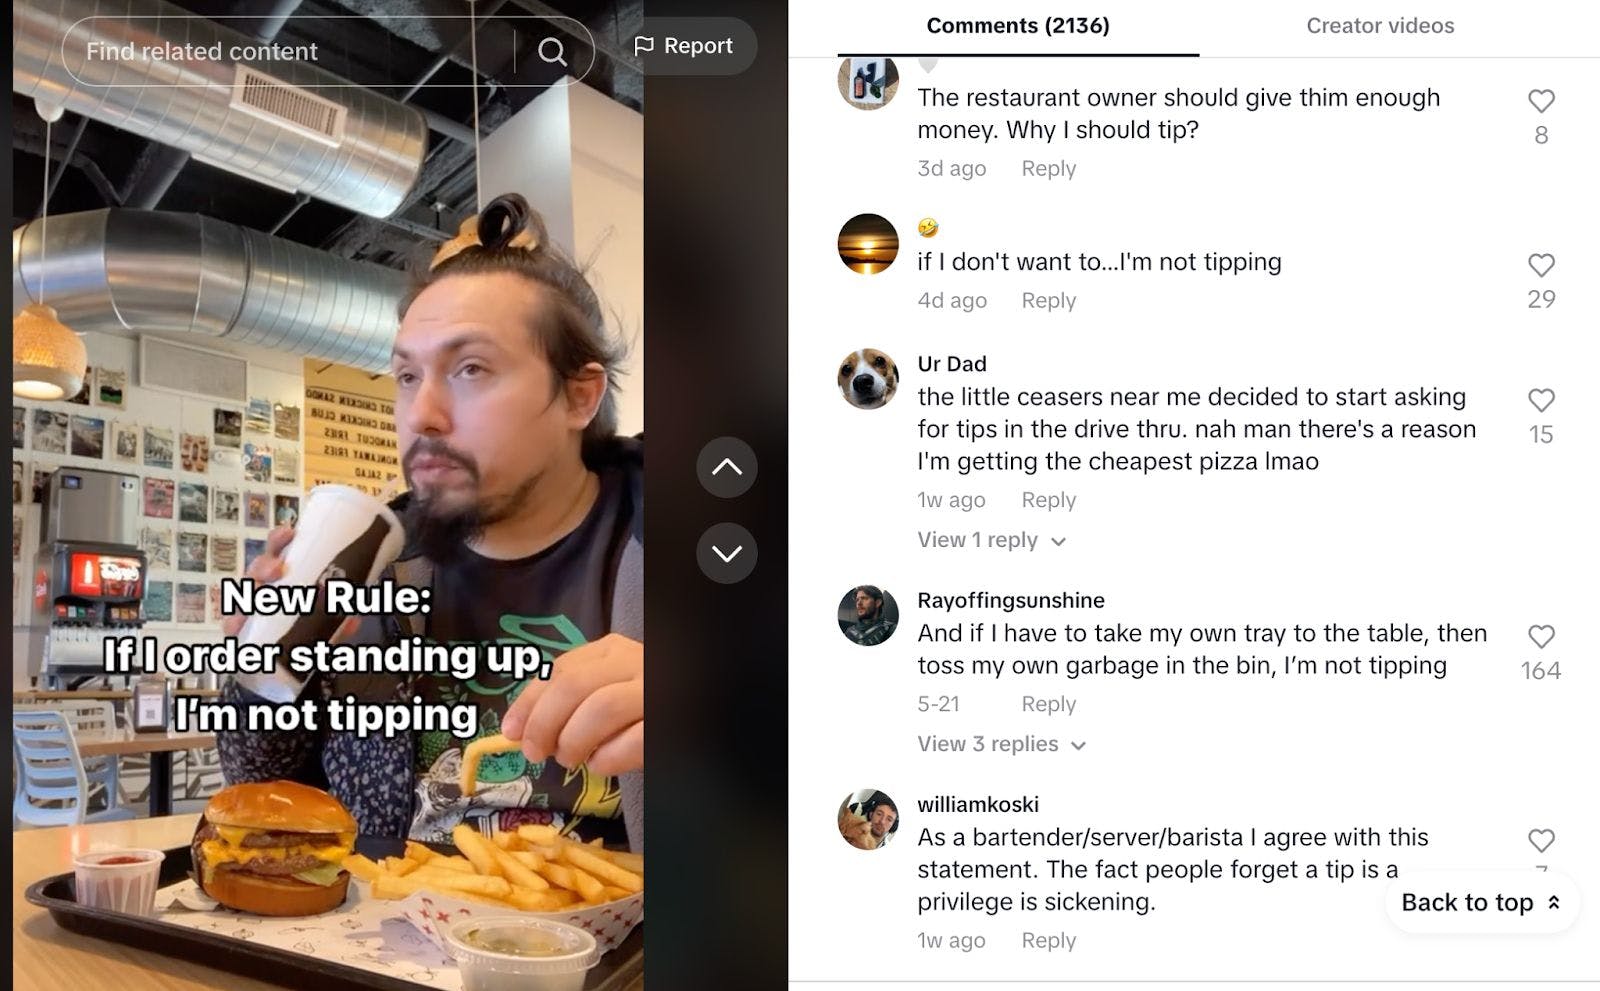 A still image from @robert_calver's TikTok where he's sipping a drink and the screen text says, “New Rule: If I order standing up, I’m not tipping.”